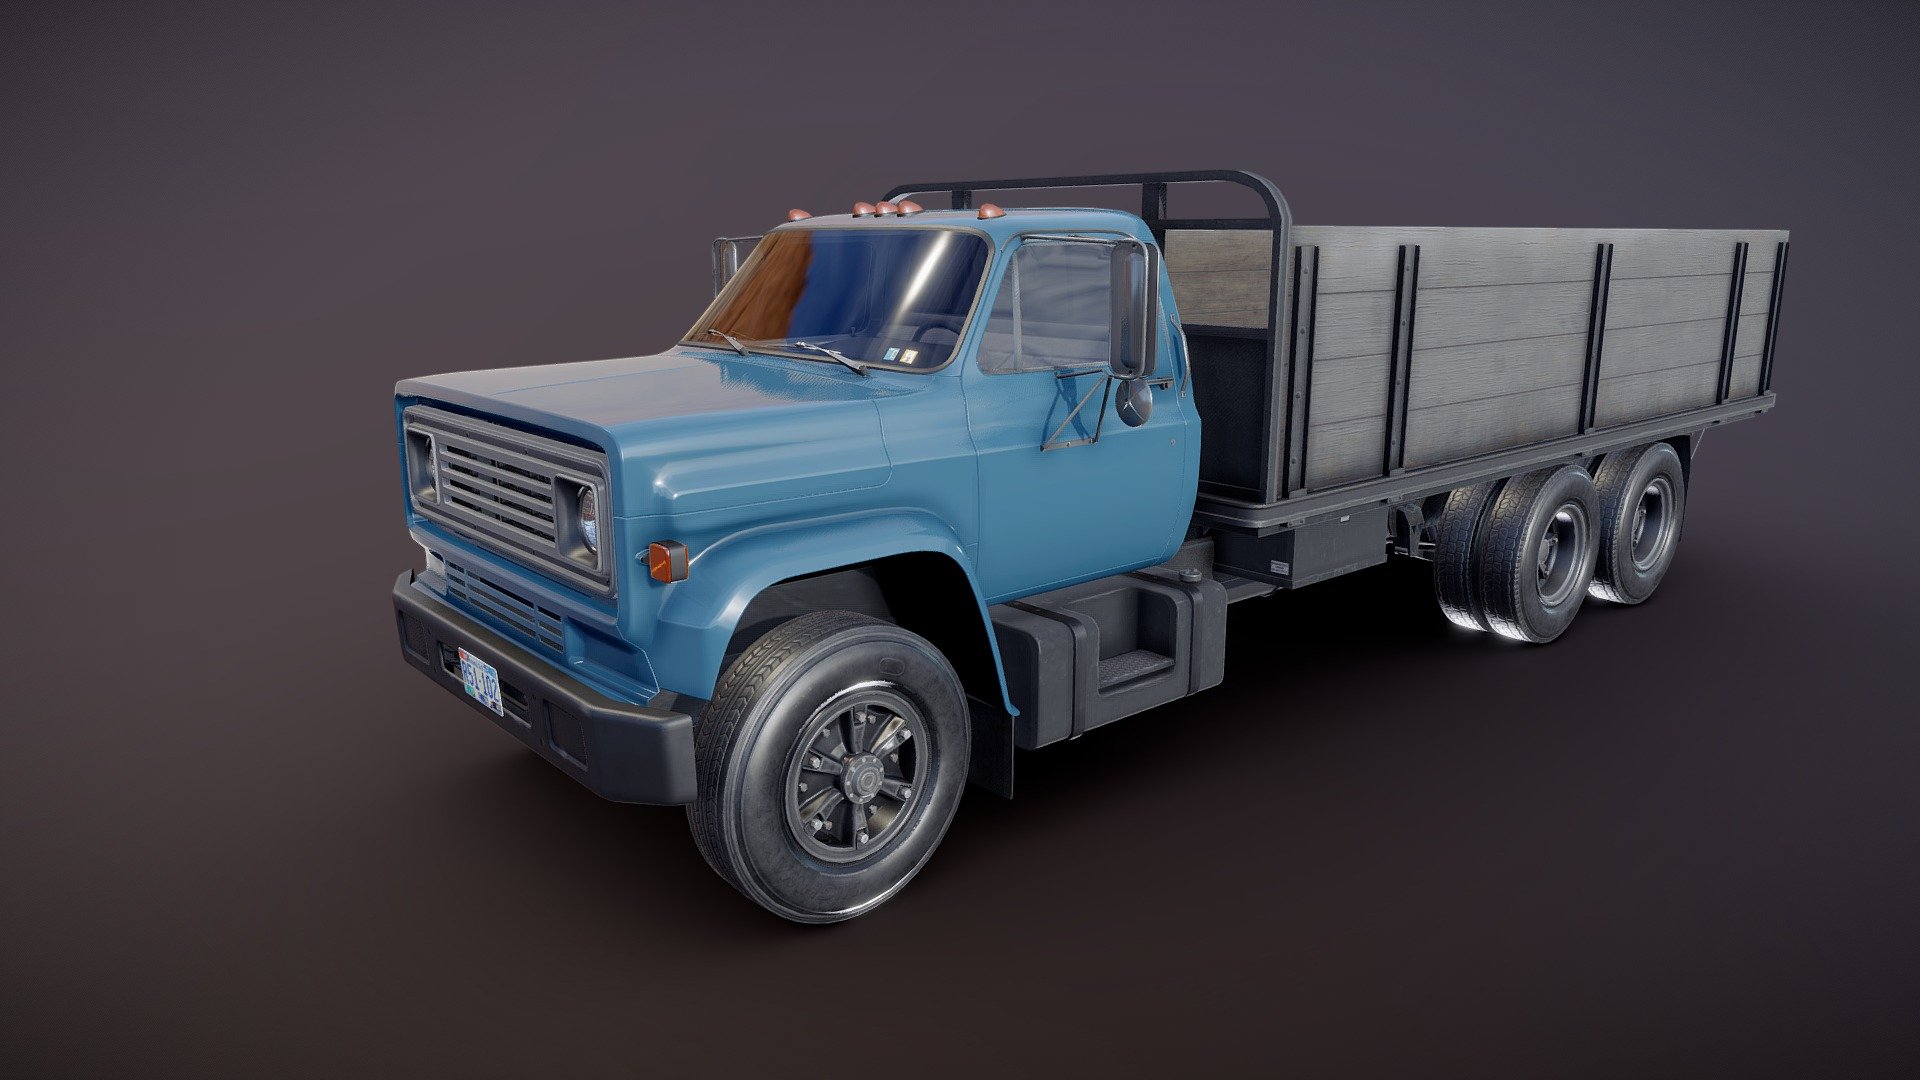 Vintage industrial flatbed truck game ready model.

Full textured model with clean topology.

High accuracy exterior model

Different tires for rear and front wheels.

Full model - 49922 tris 29195 verts

High detailed rims and tires, with PBR maps(Base_Color/Metallic/Normal/Roughness.png2048x2048 )

Original scale. Lenght 7m , width 2.1m , height 2.37m.

Model ready for real-time apps, games, virtual reality and augmented reality 3d model